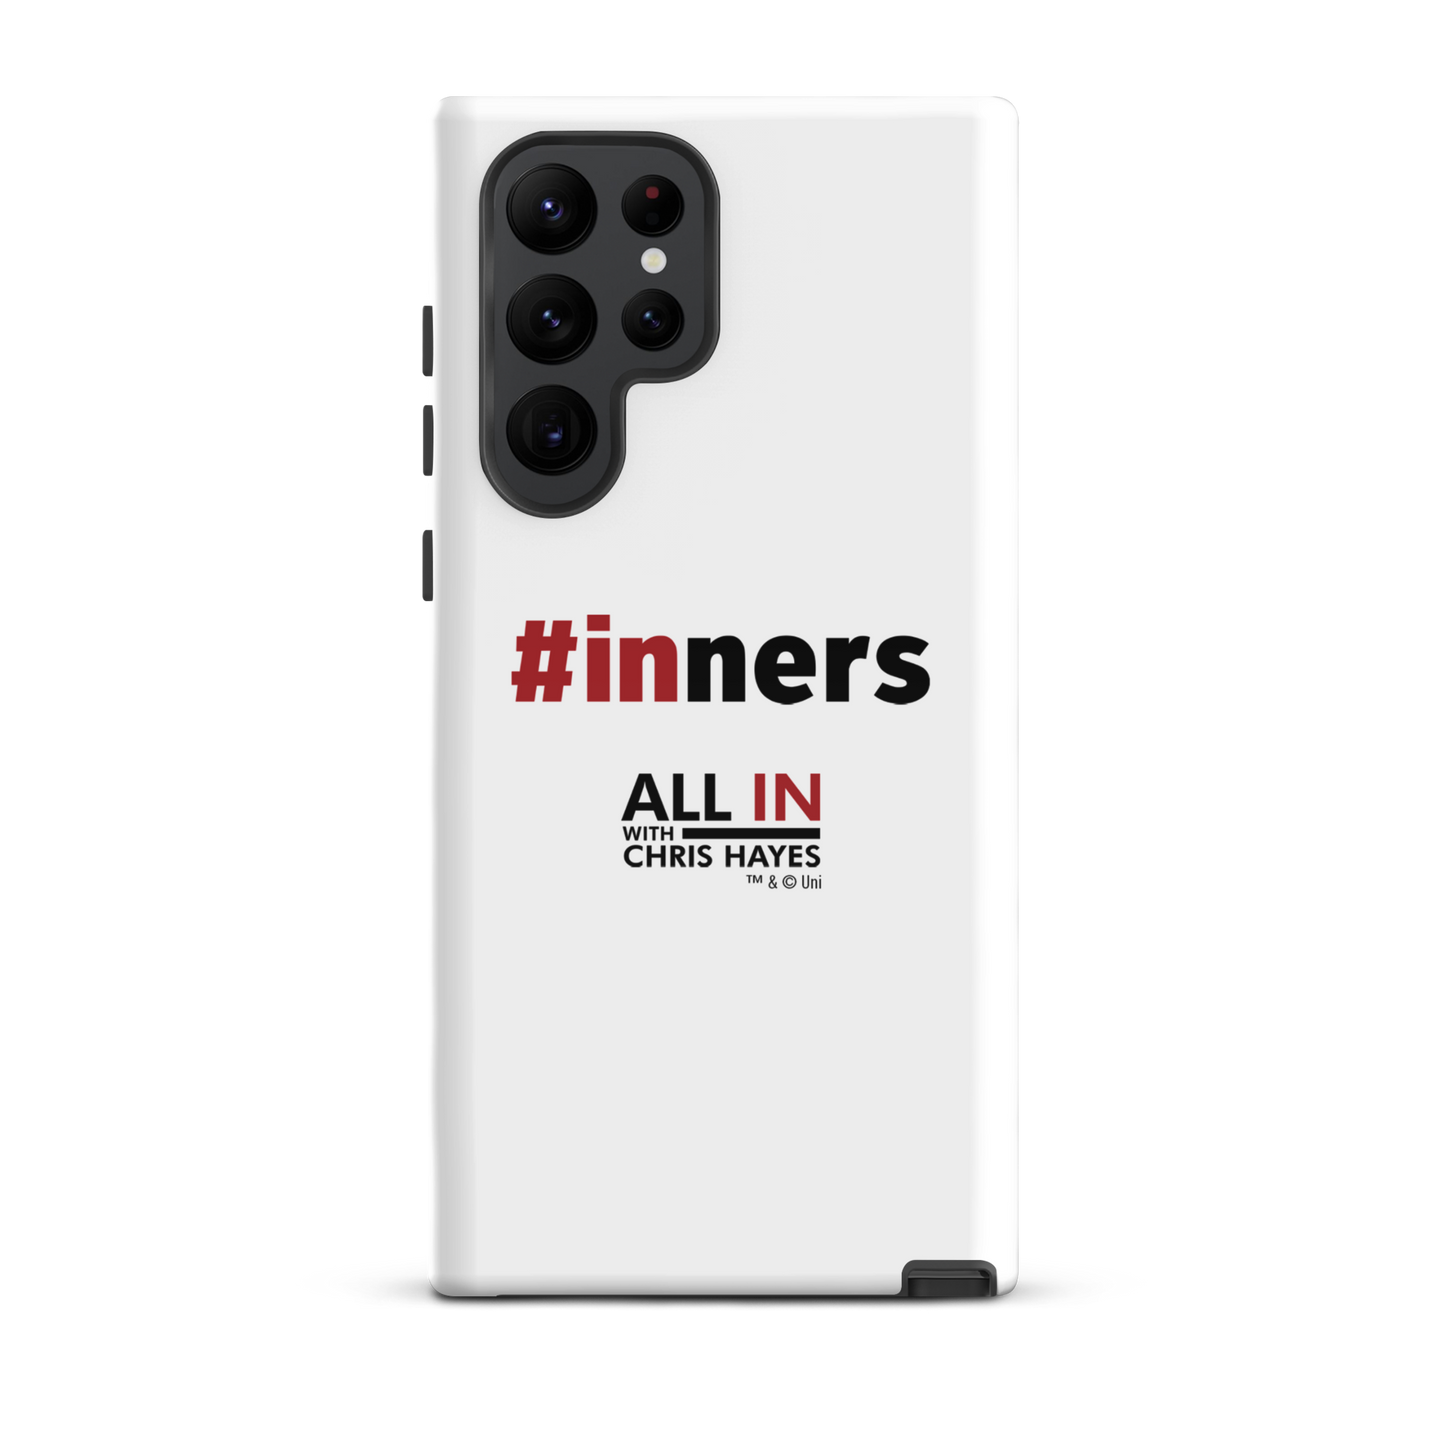 All In with Chris Hayes #INNERS Tough Phone Case - Samsung